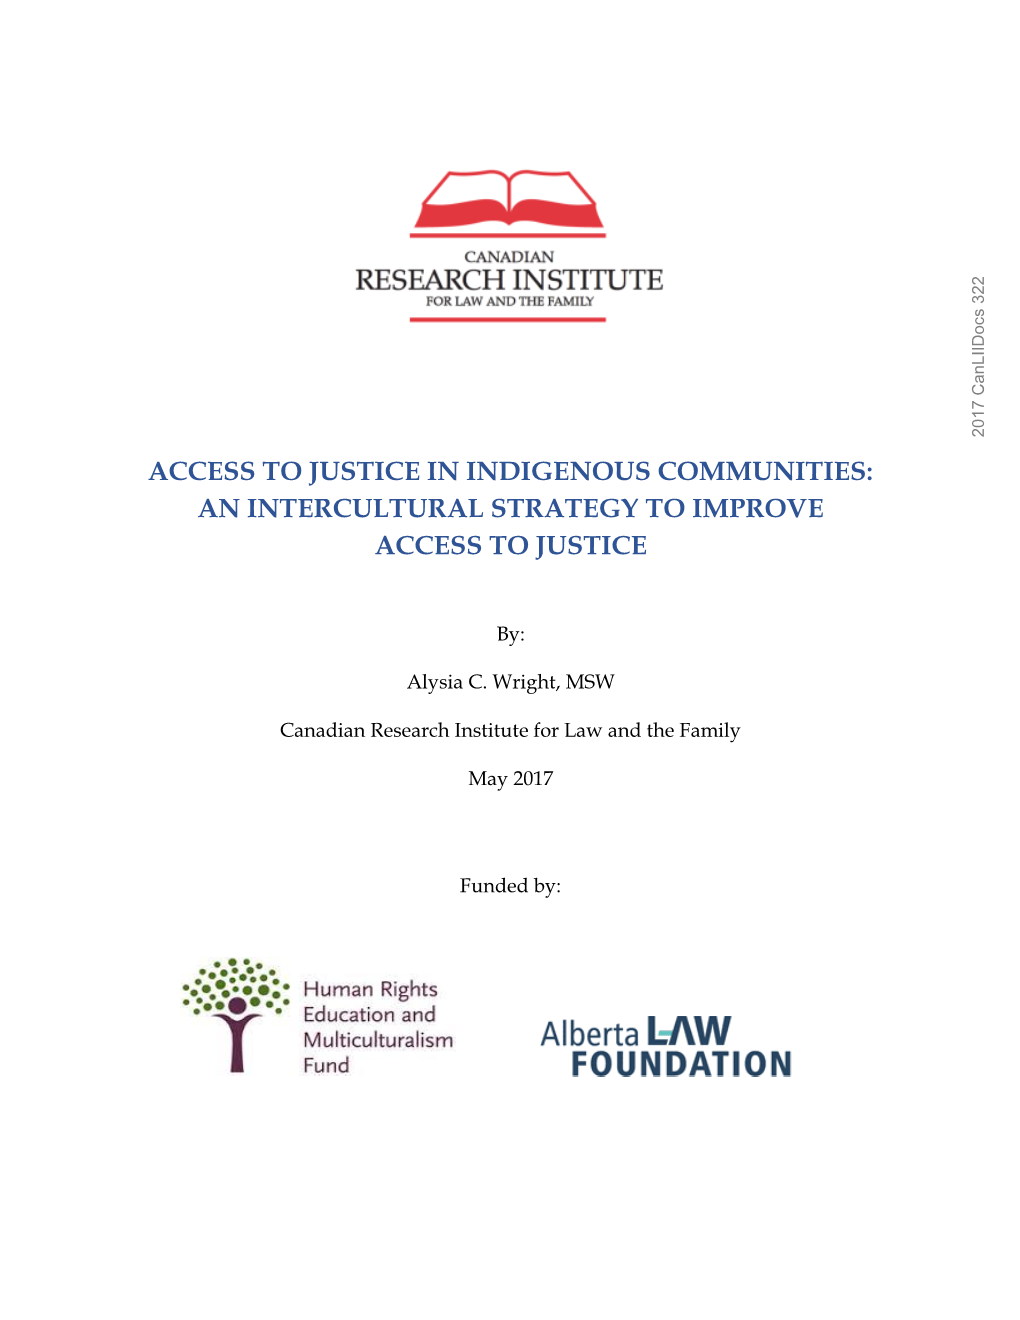 Access to Justice in Indigenous Communities: an Intercultural Strategy to Improve Access to Justice